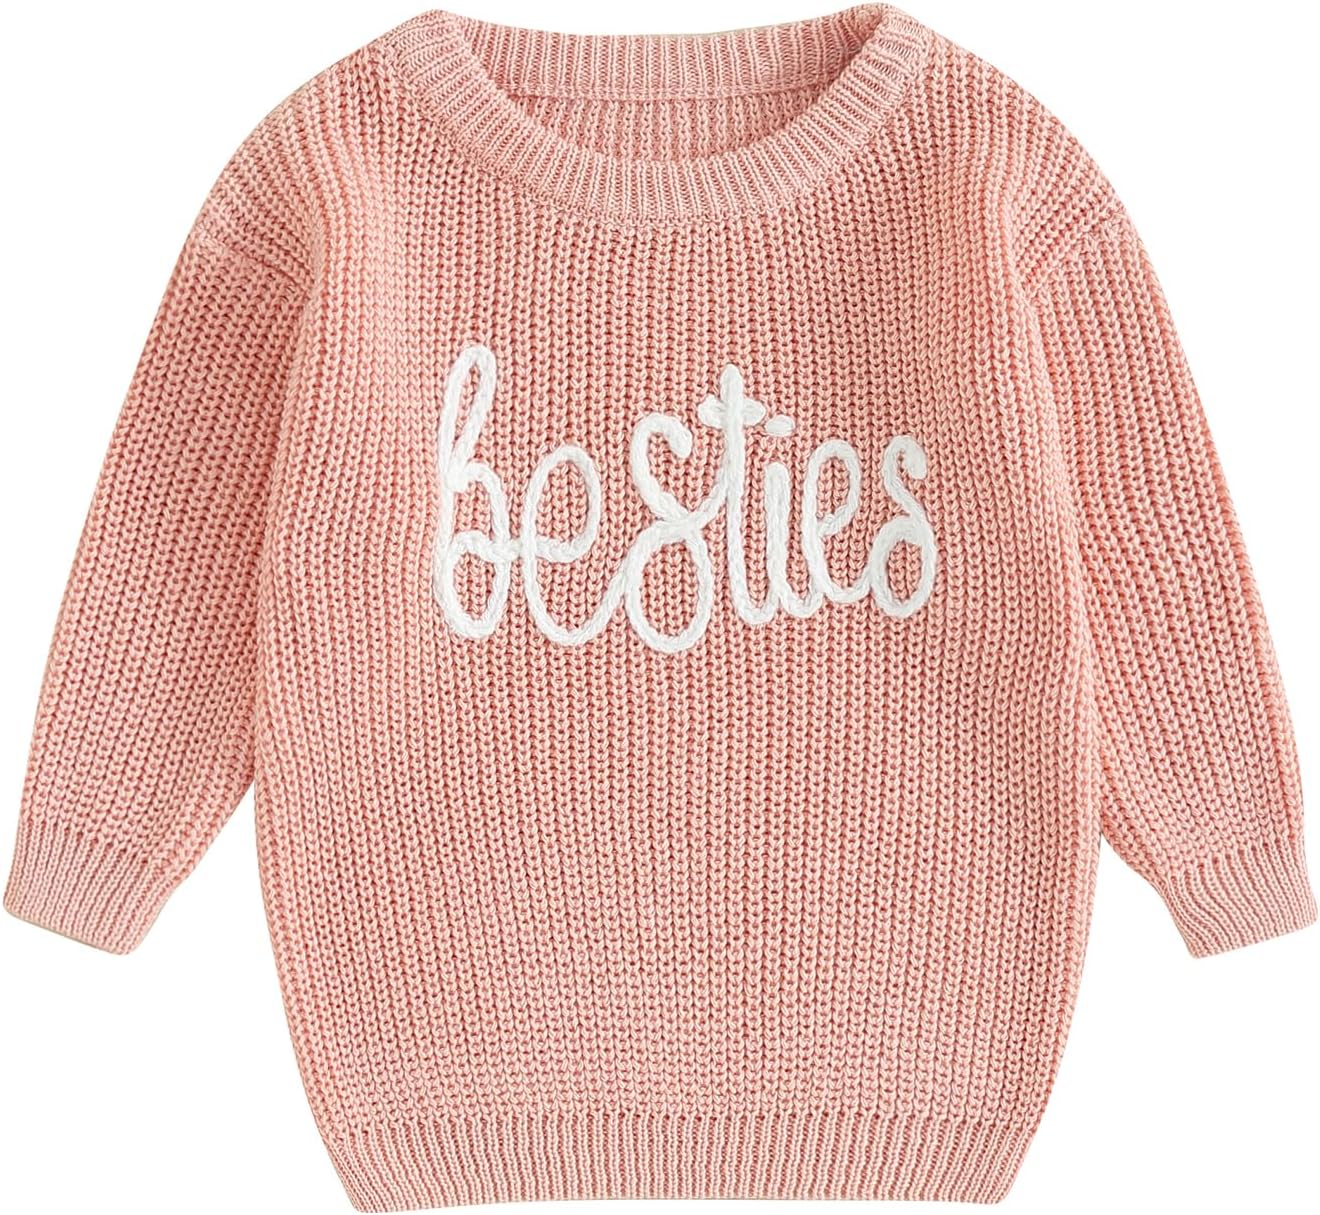 Baby/Toddler Chunky Knit "Besties" Sweater